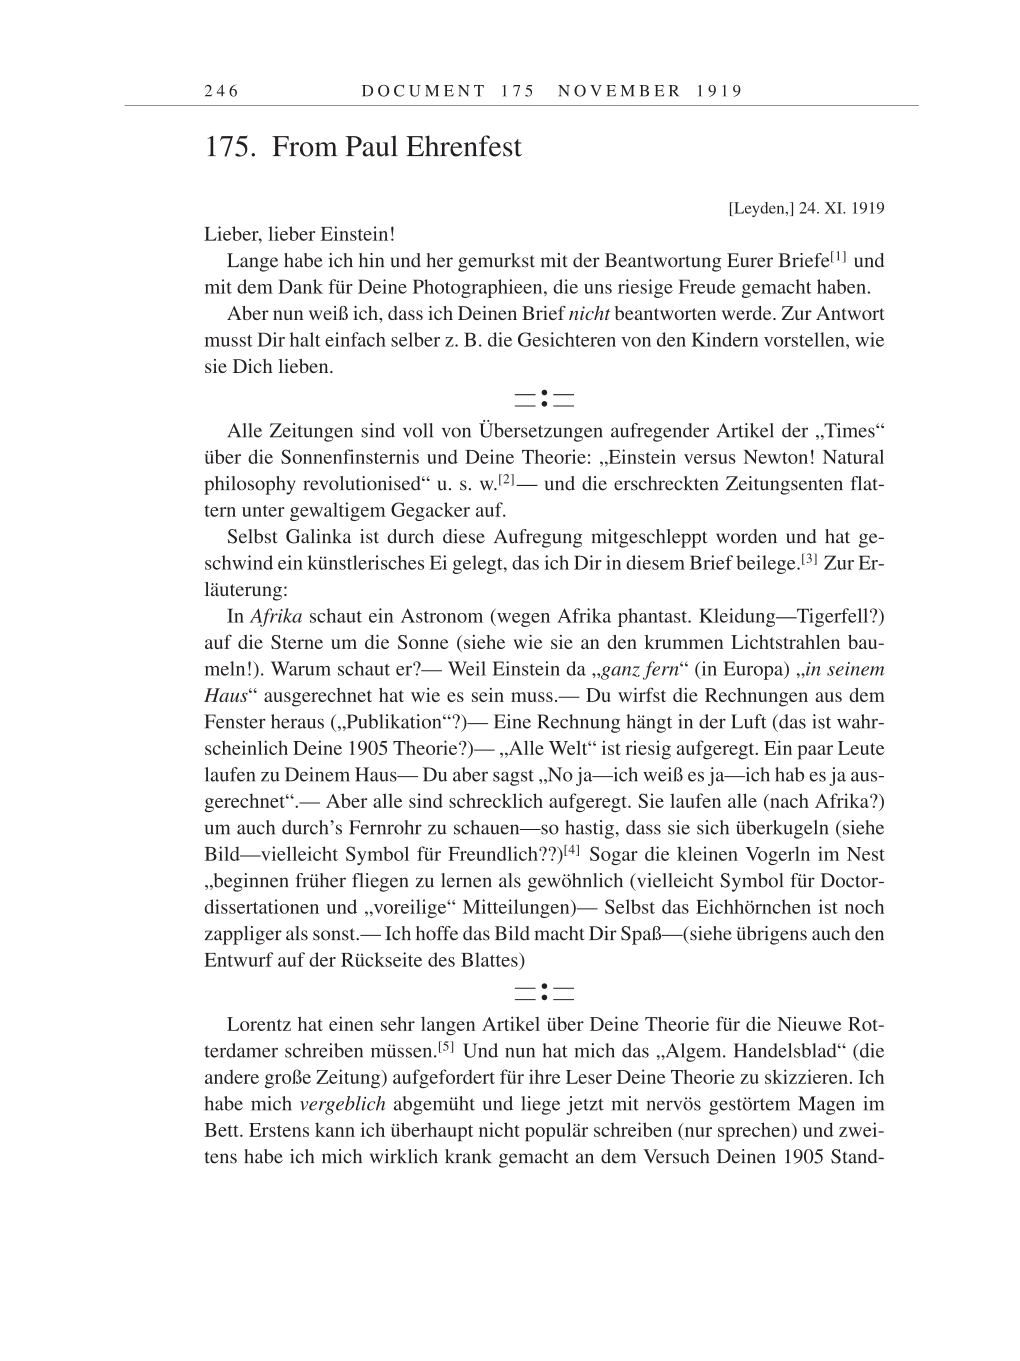 Volume 9: The Berlin Years: Correspondence January 1919-April 1920 page 246